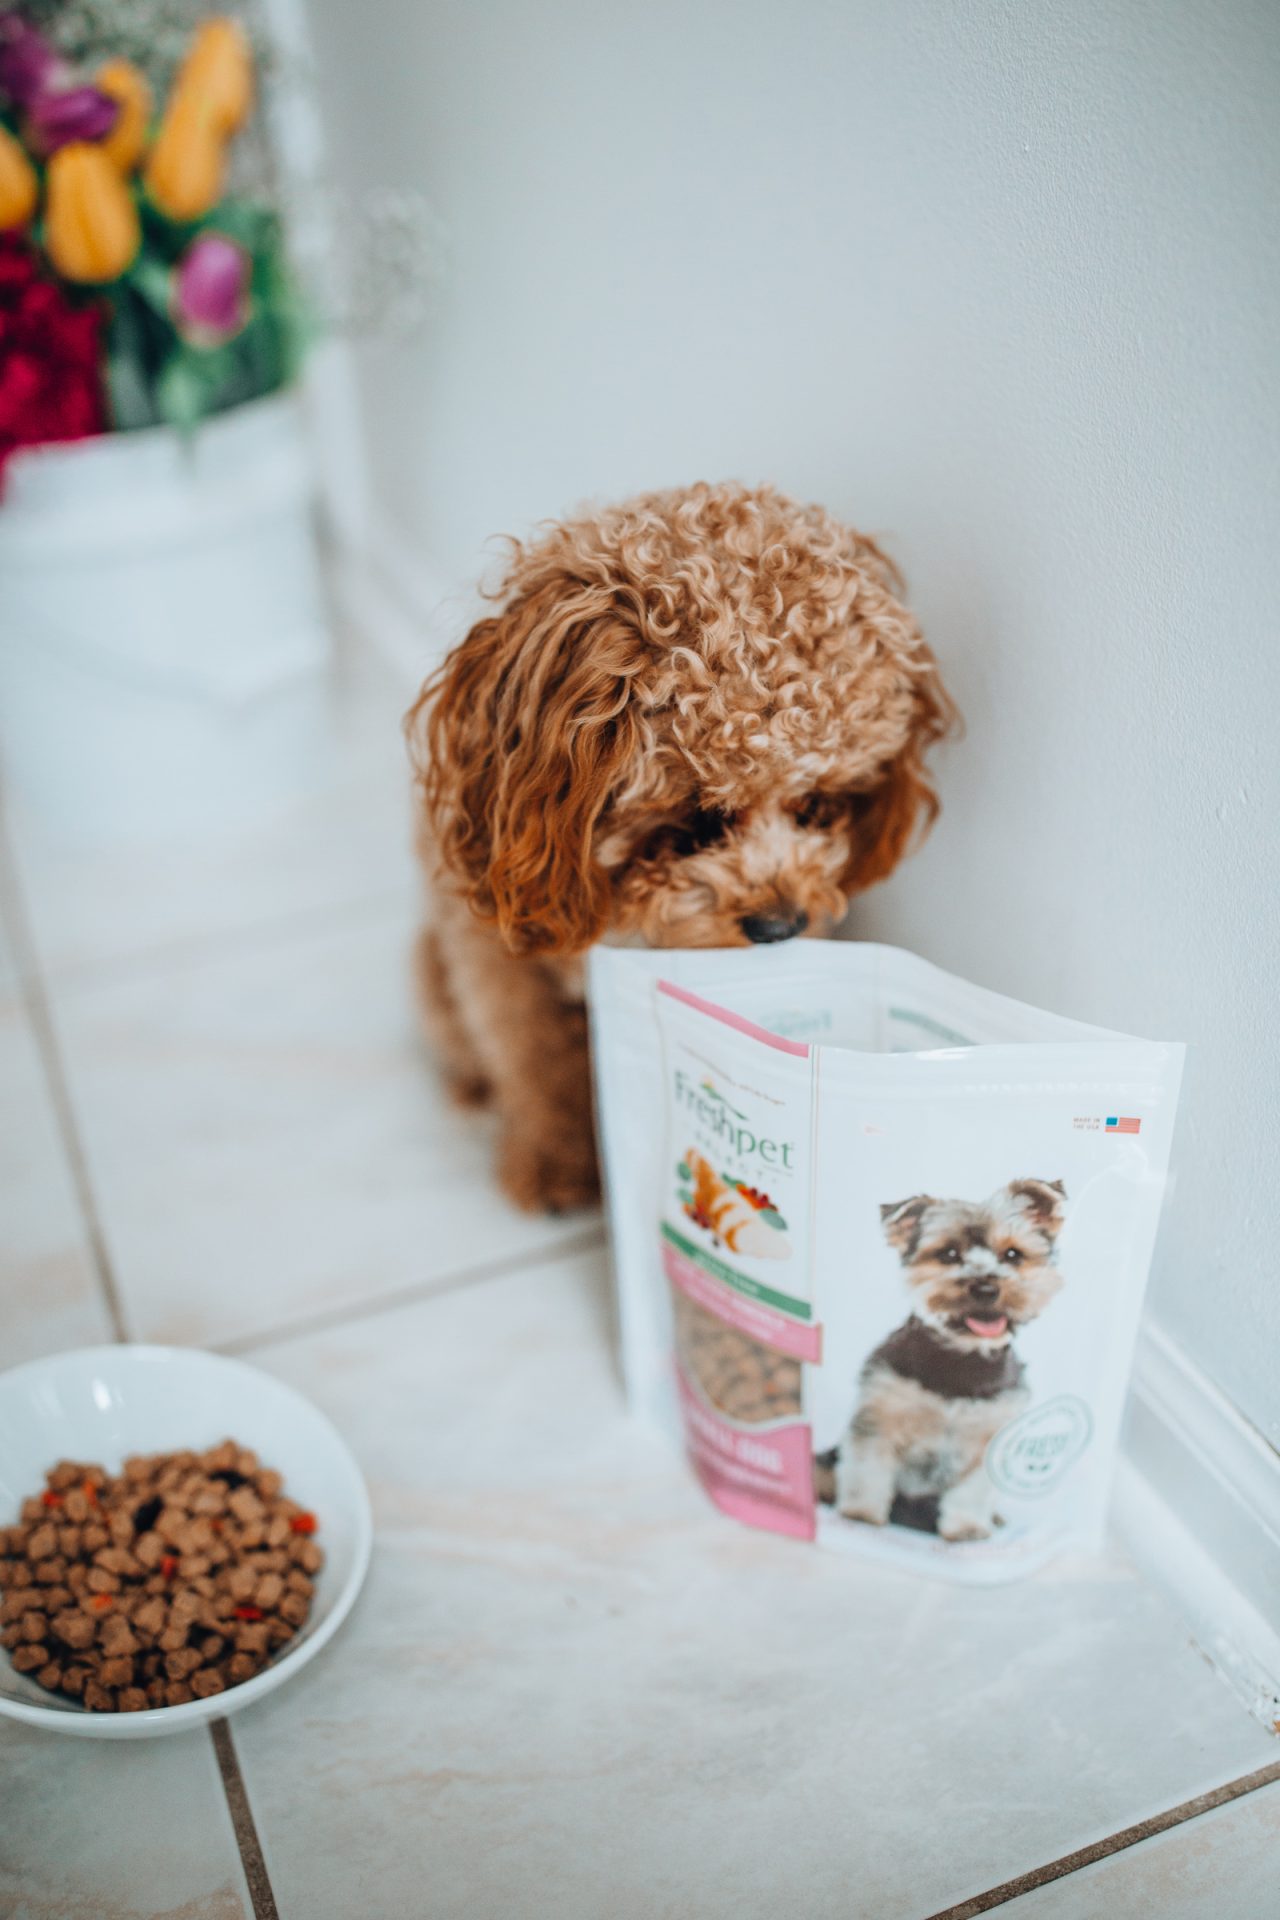 Chicago Motherhood Blogger Happily Inspired is sharing the health benefits of dogs on babies with freshpet food! Be sure to check out the benefits.